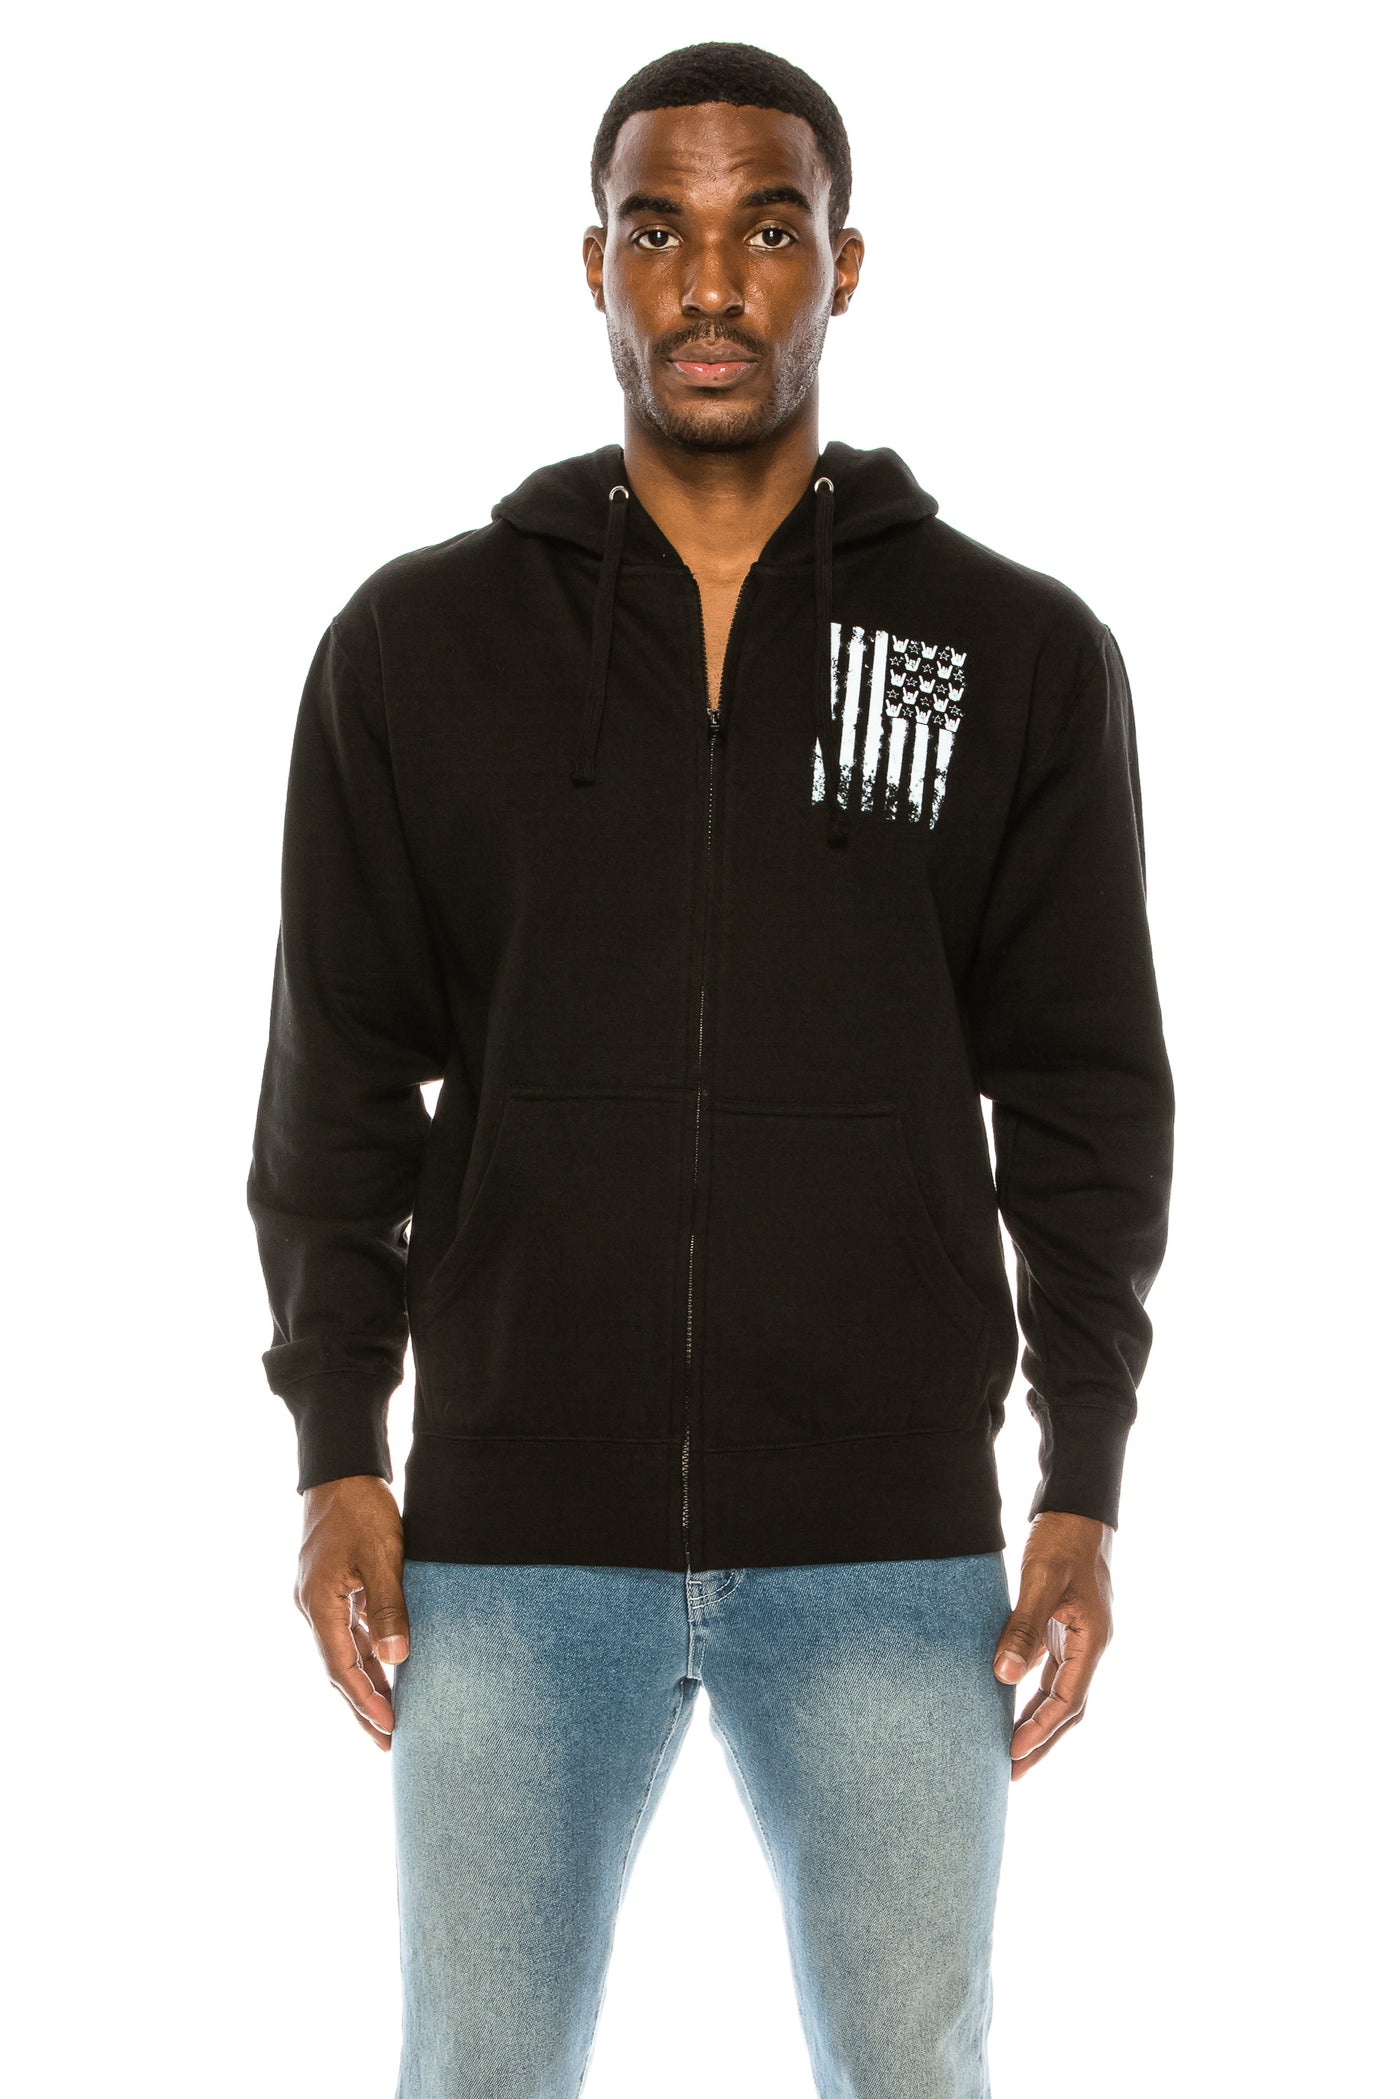 FLAG HANDS AND STRIPES HOODIE ZIP UP – Trailsclothing.com